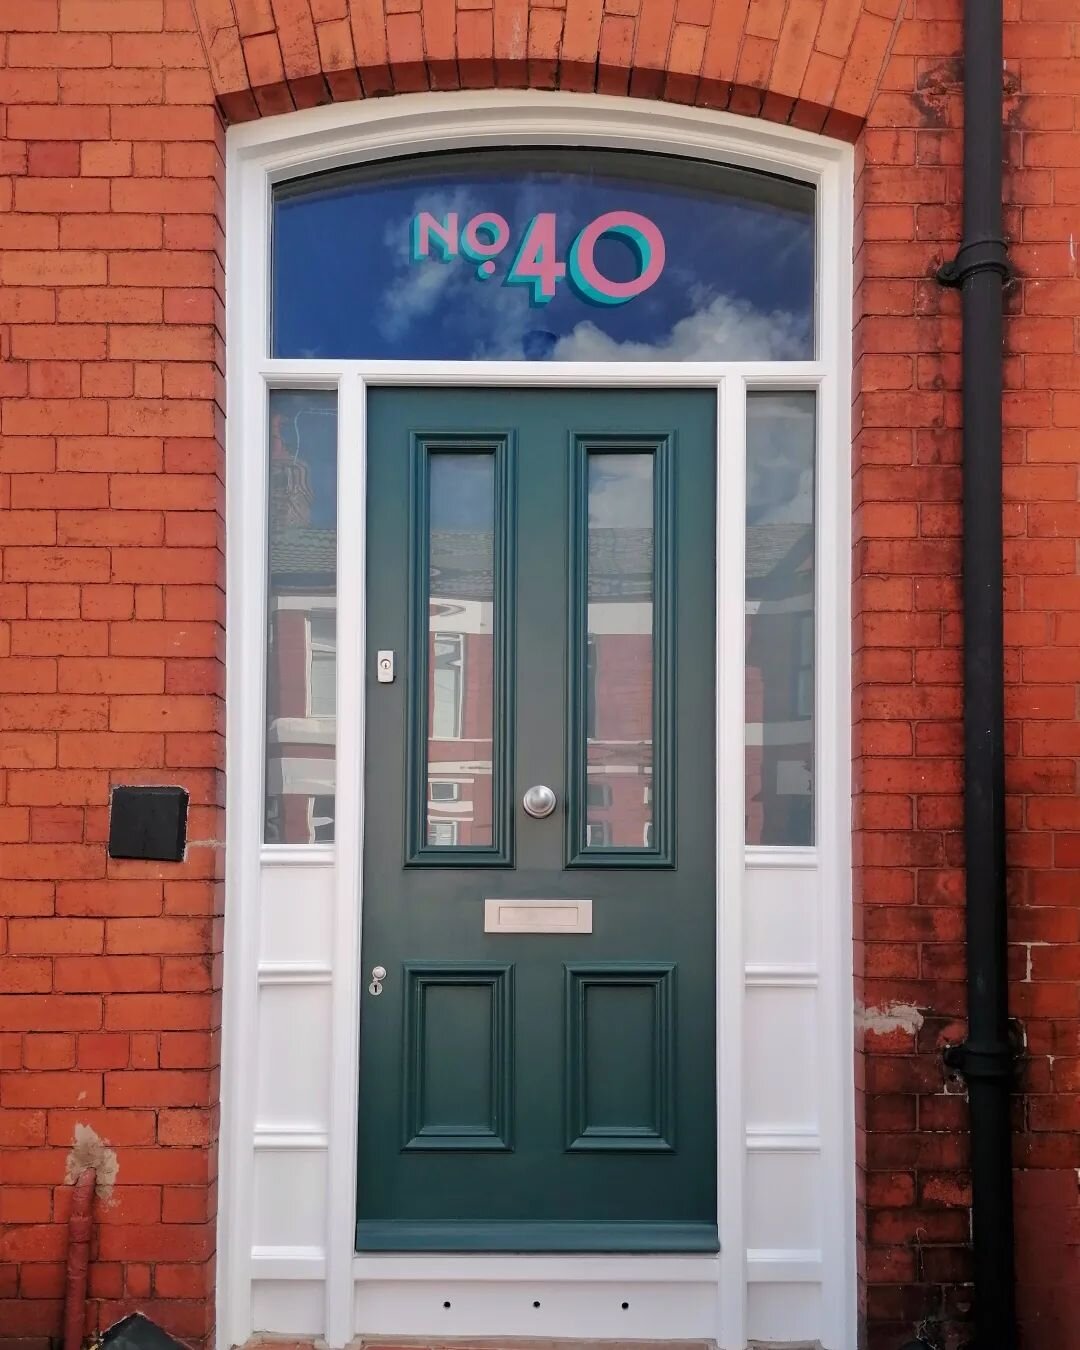 No. 40.

Another house number from last week. No gold on this one, just paint.

Draw up to spec on site before painting in reverse. Hard to get good photos but I love the contrast of modern numbers against a traditional door.

Want something similar?